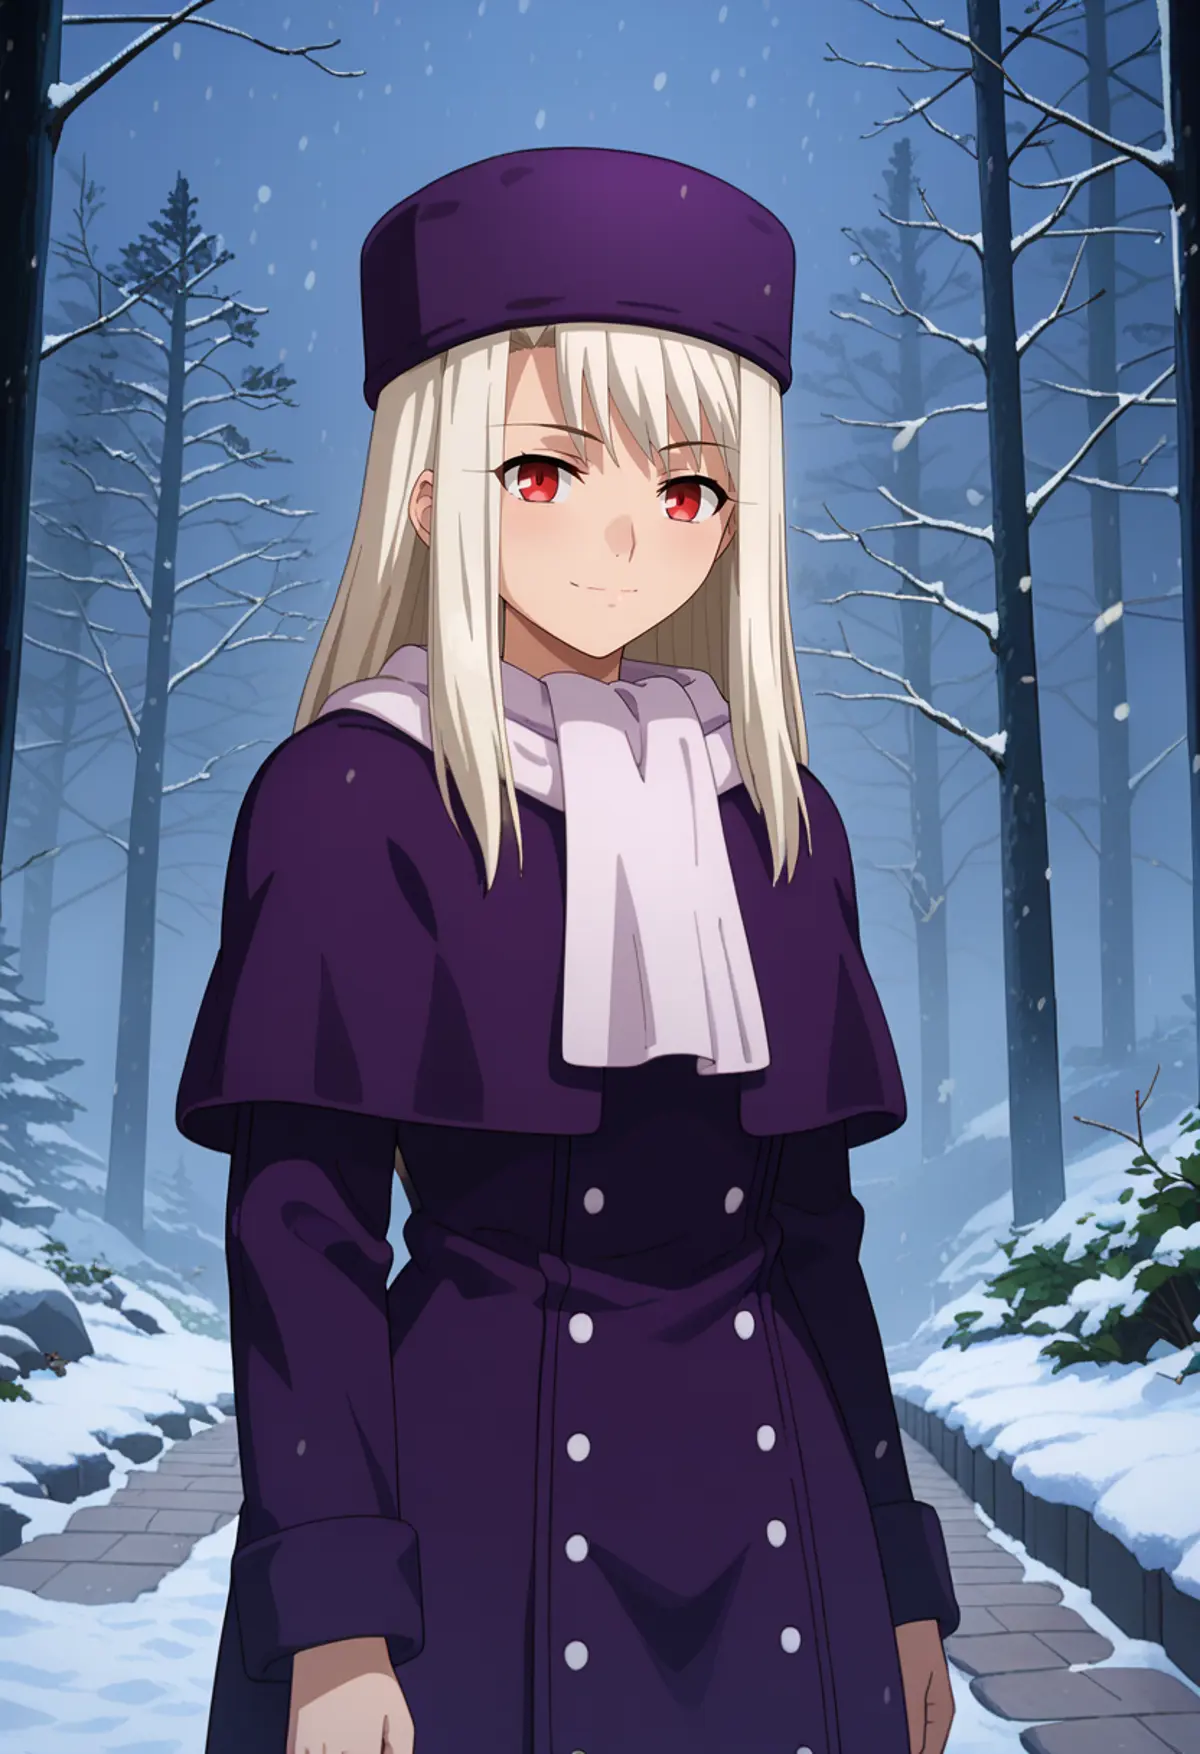 A girl with long blonde hair and red eyes wearing a purple coat with a white scarf and matching purple hat standing in a snowy forest setting. 